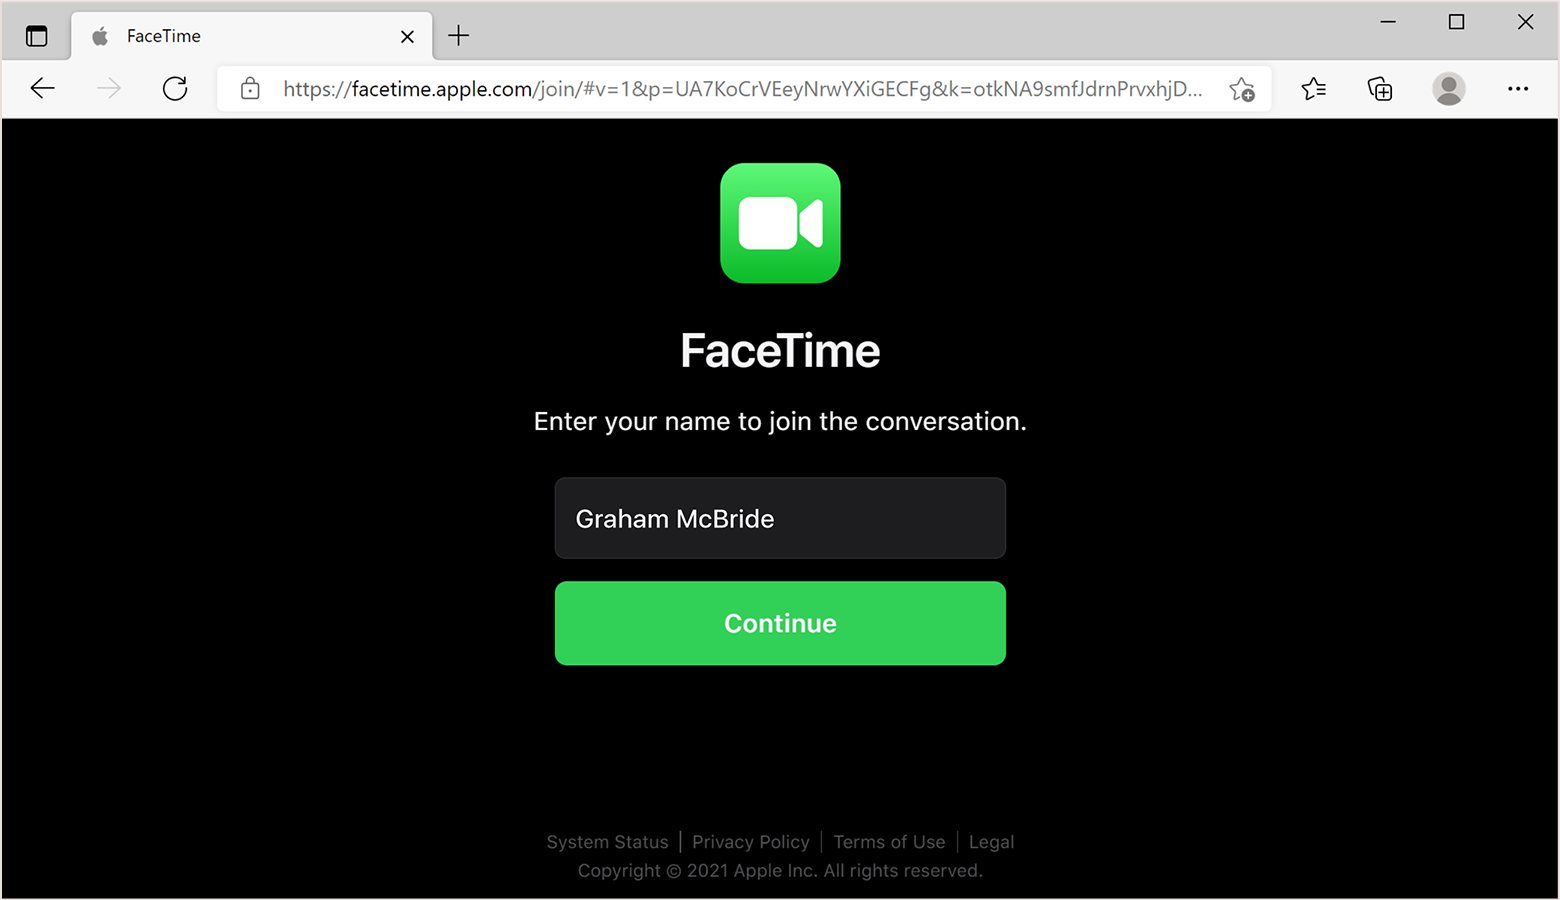 FaceTime browser window: Enter your name